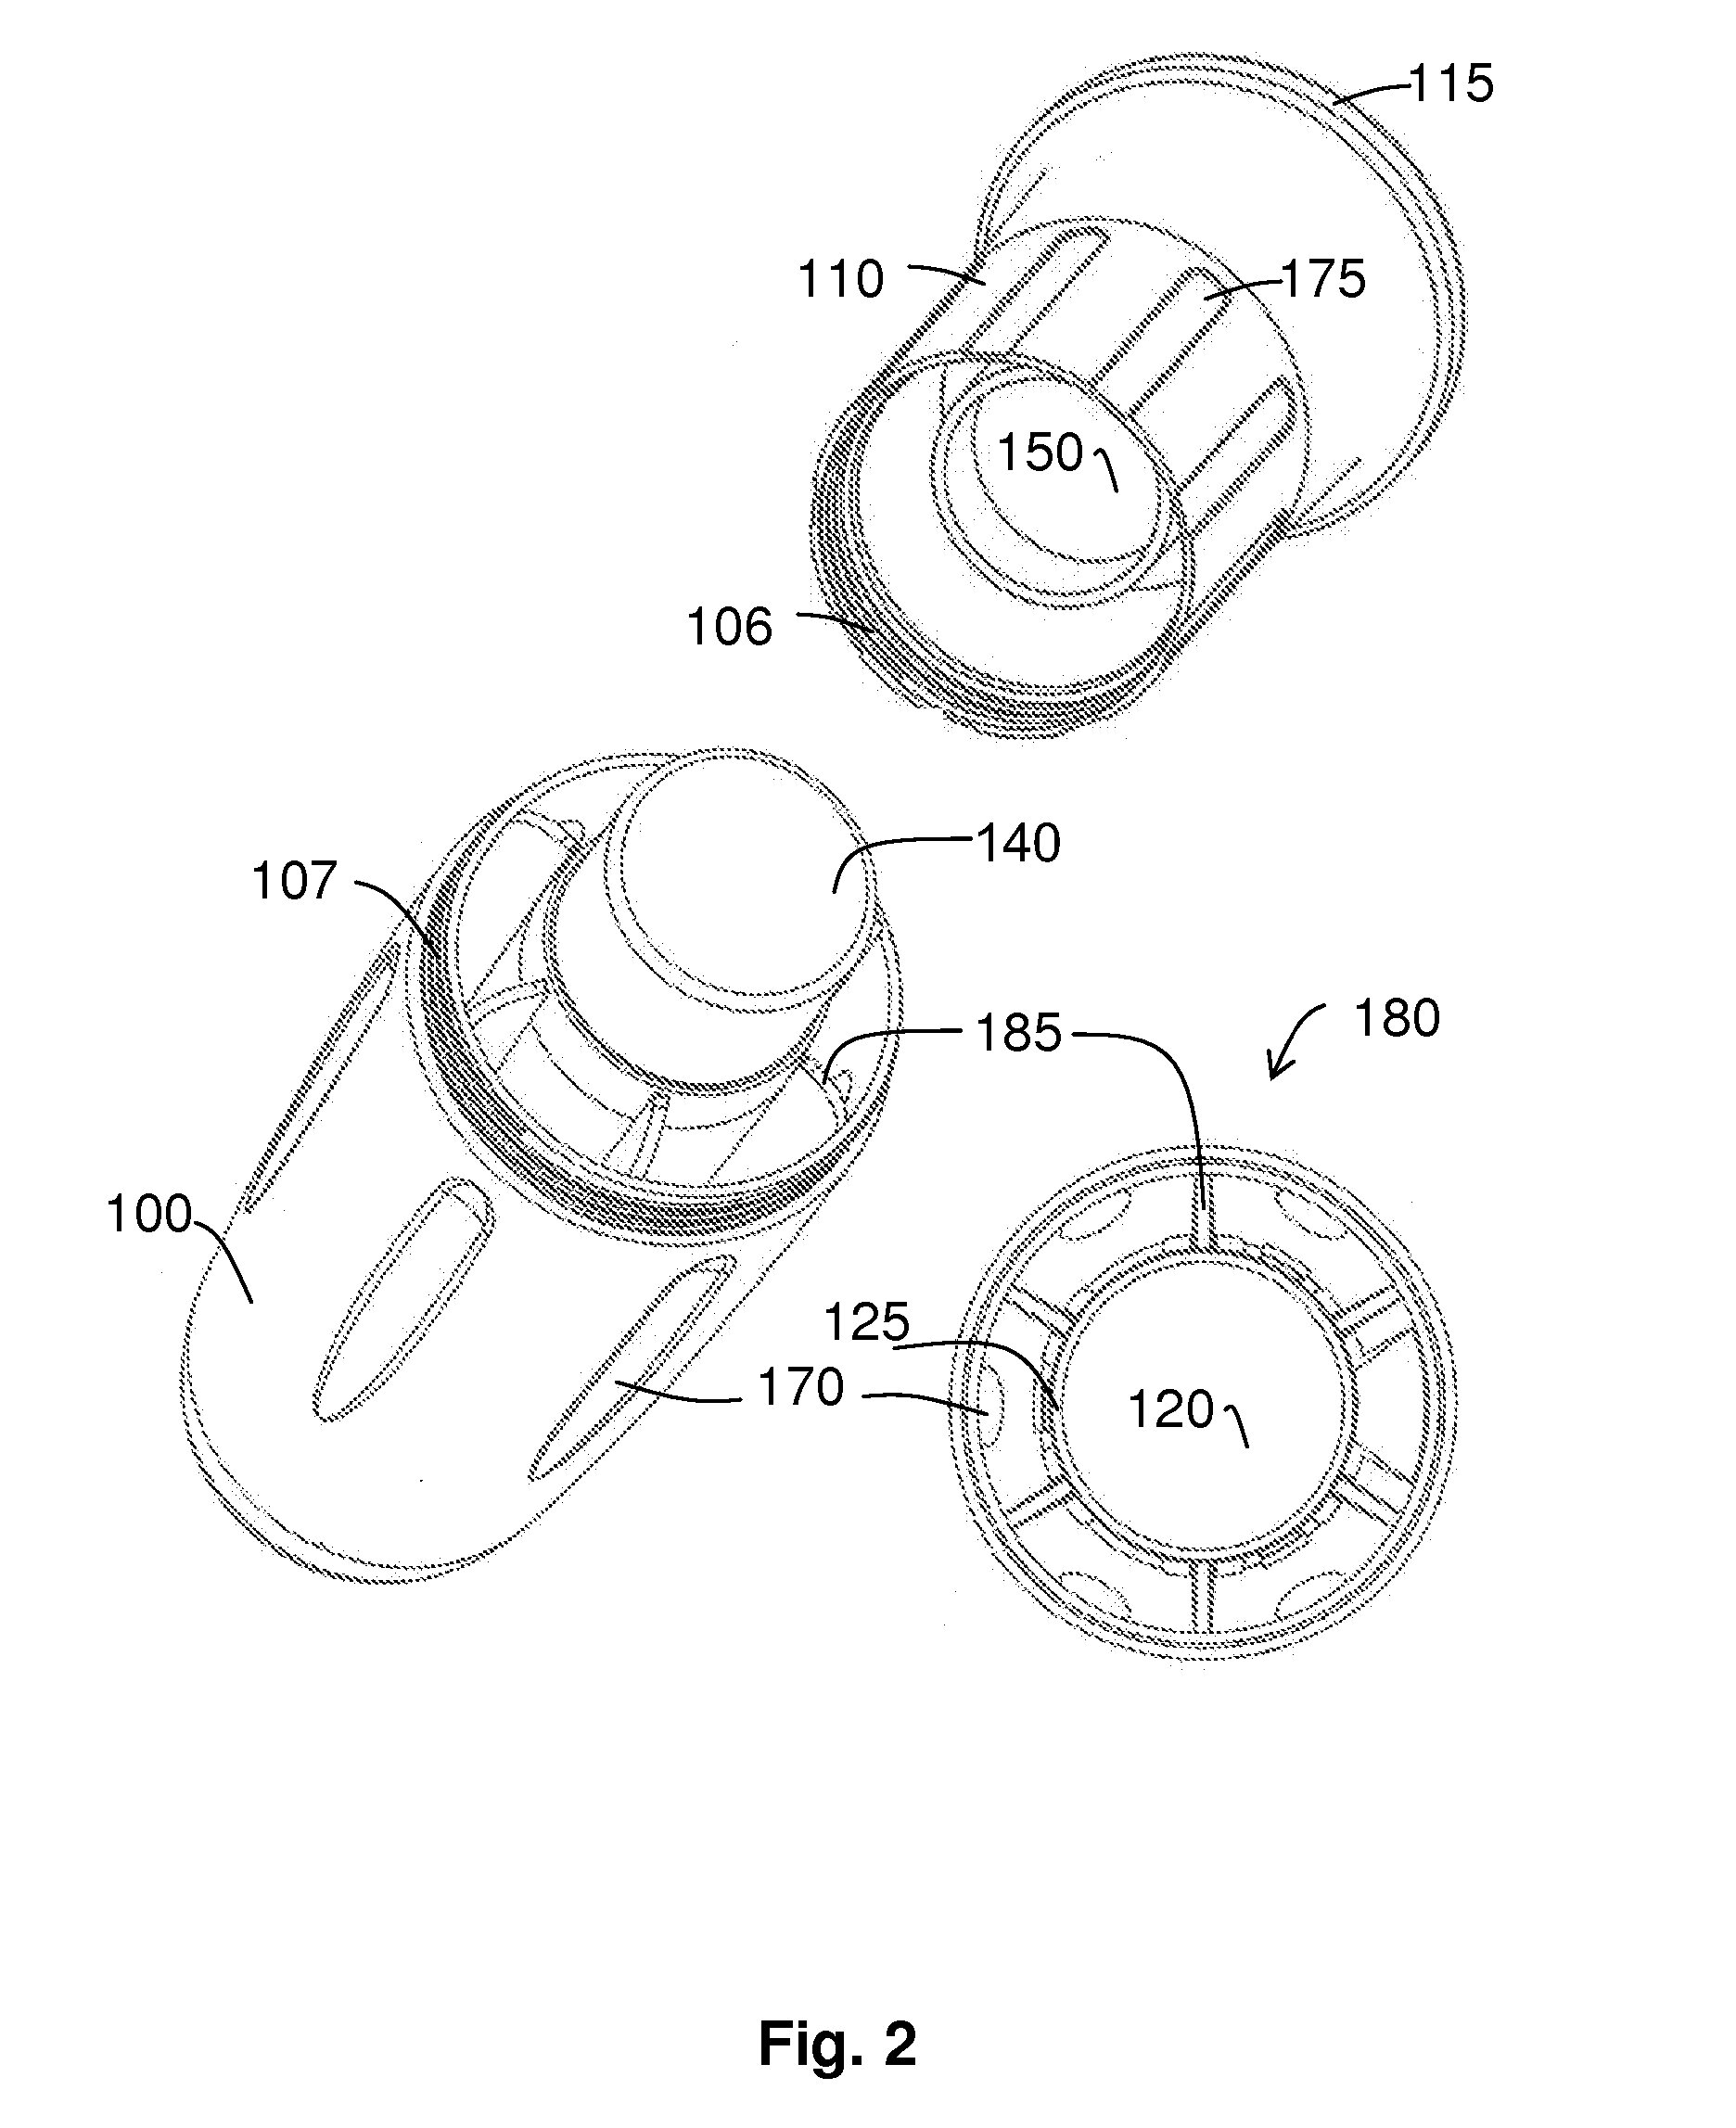 Cooling device for locally anesthetizing an area on the surface of the body